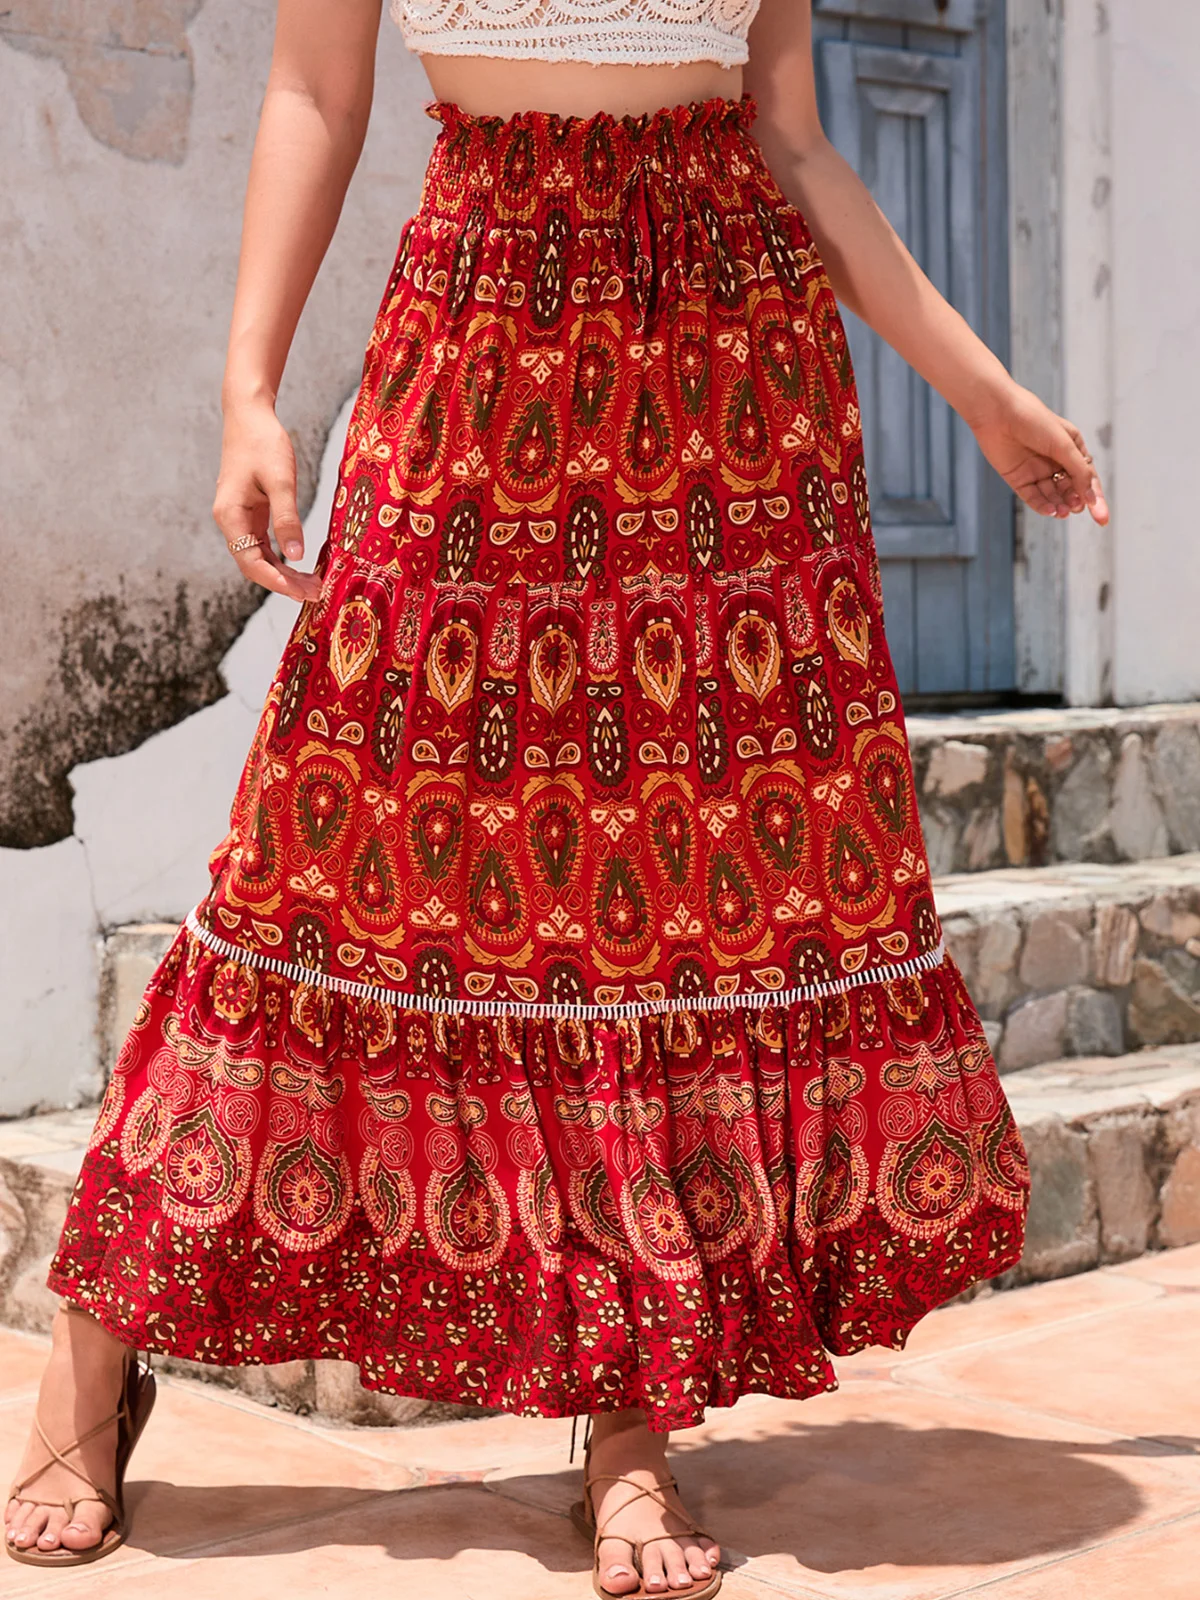 Casual Ethnic Geometry A-Line Natural Maxi Skirt